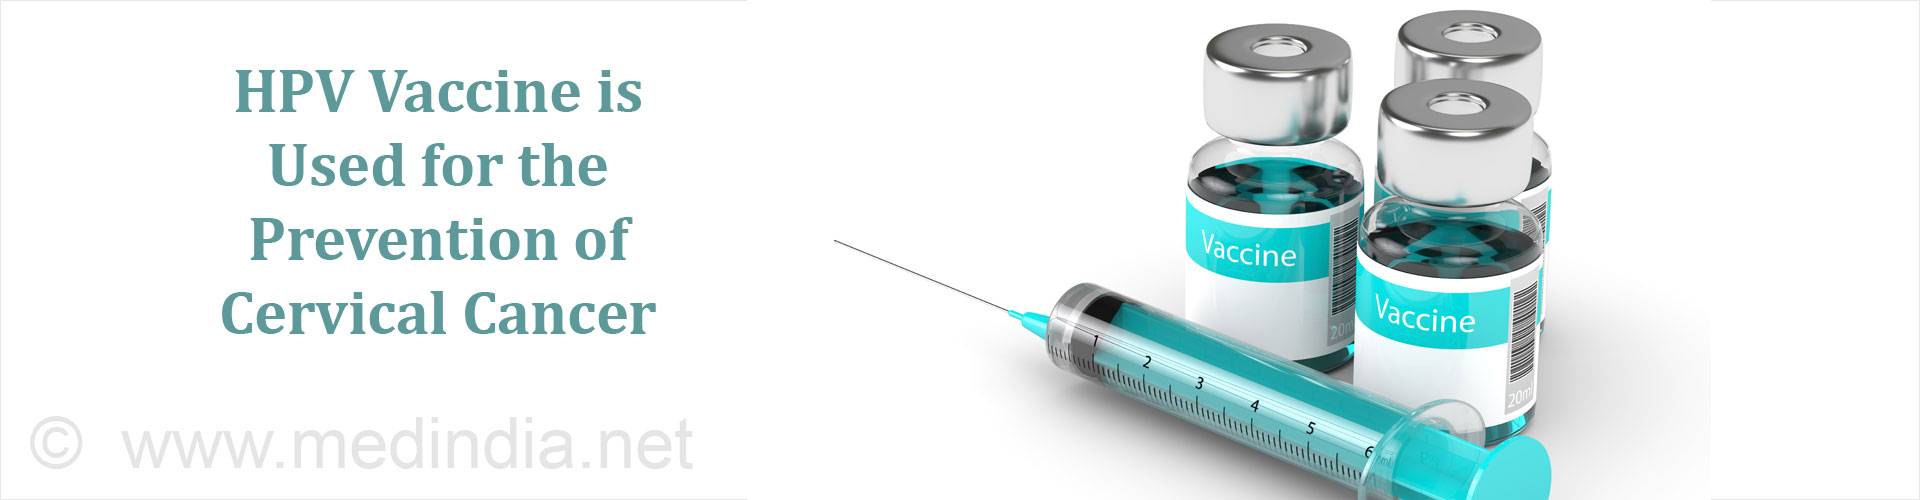 HPV vaccine is used for the prevention of cervical cancer